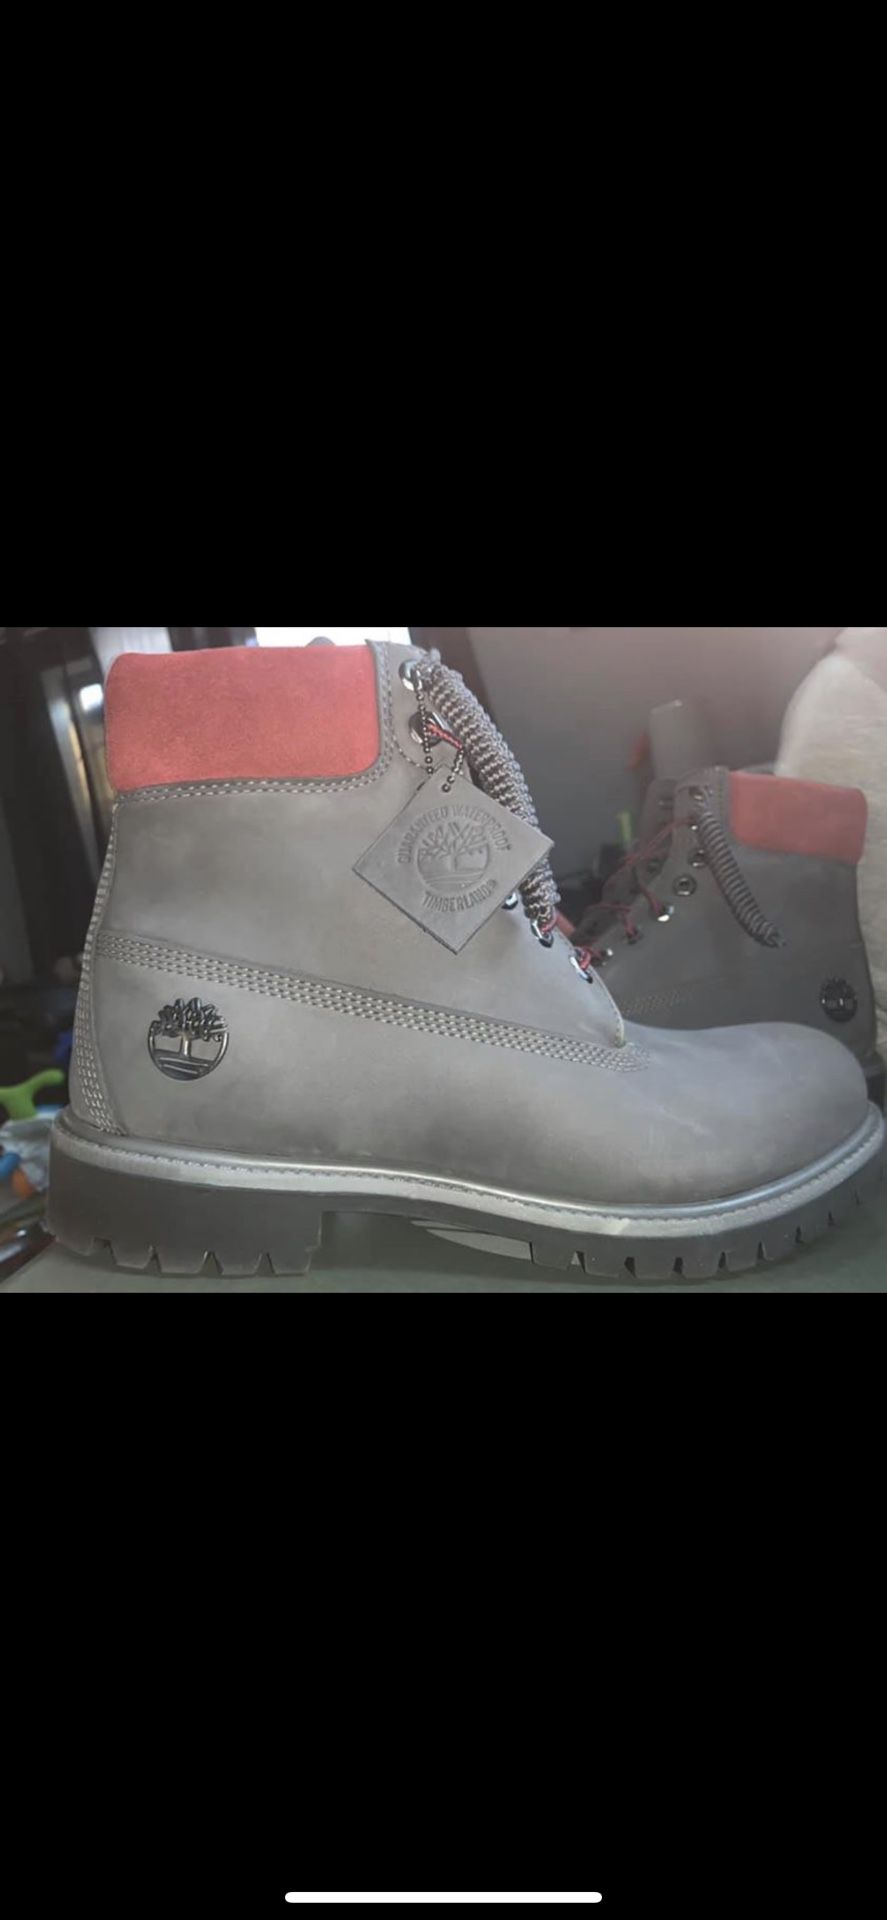 Men’s timberland boots NEW waterproof!!!size 10 $115 in denver alameda and federal area